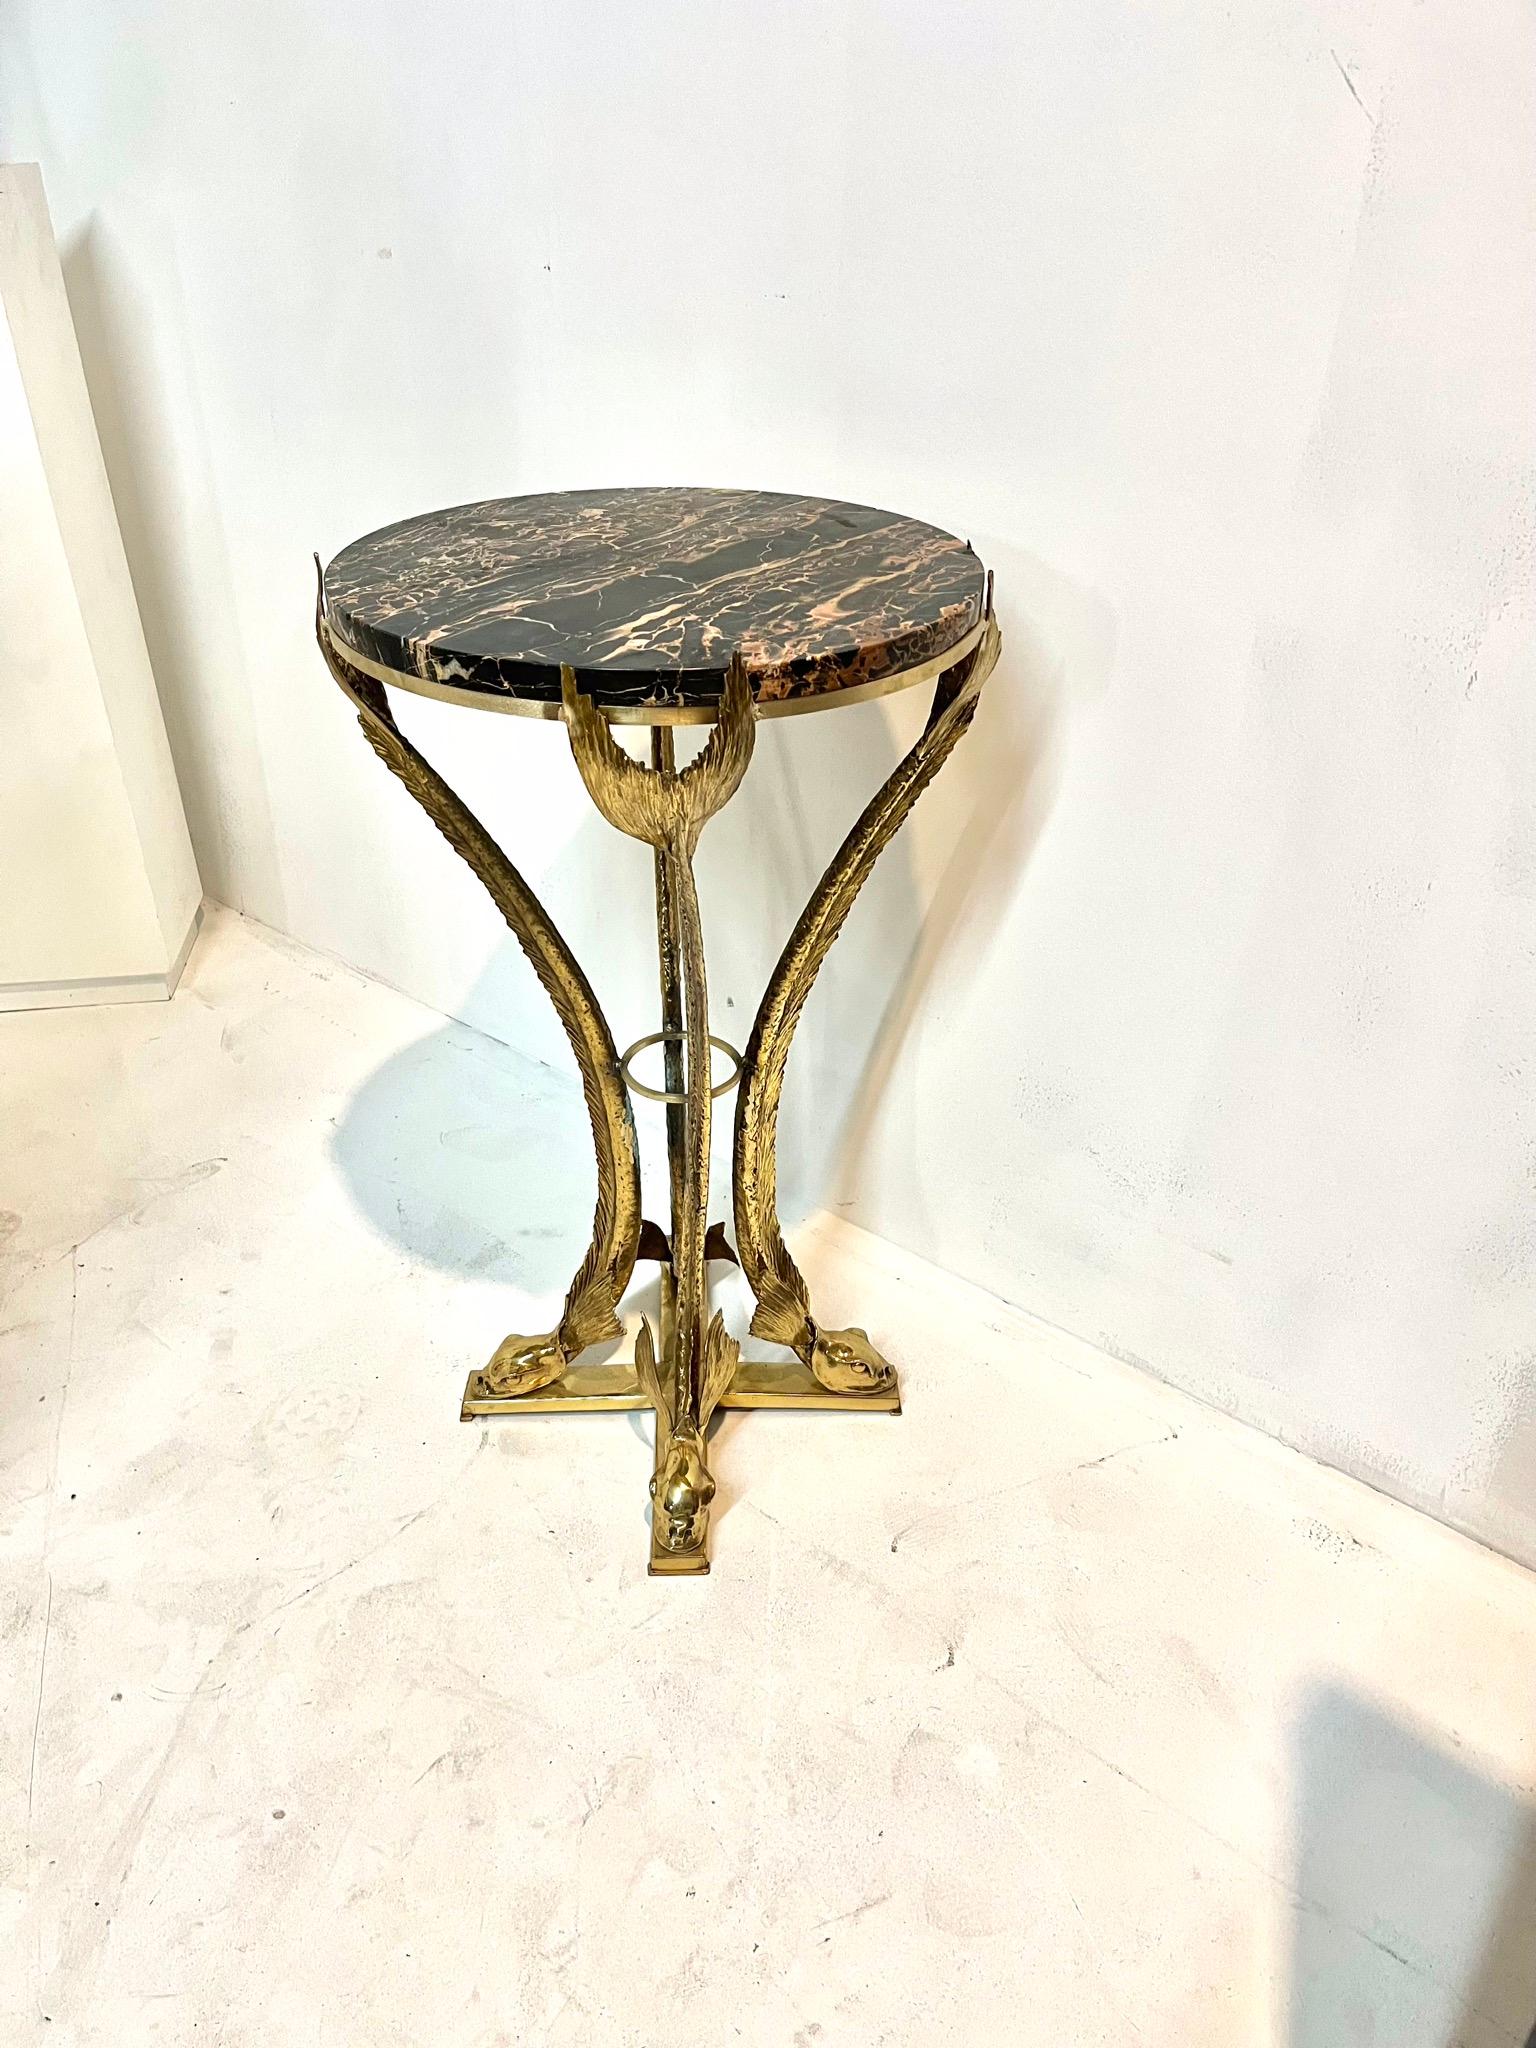 Elegant bronze and marble top for this sculptural Gueridon by Jacques Duval Brasseur.
Four stylized Tritons supporting a portor marble top.
Fabulous design, precious elements all together for this work of art by the French Sculptor Jacques Duval